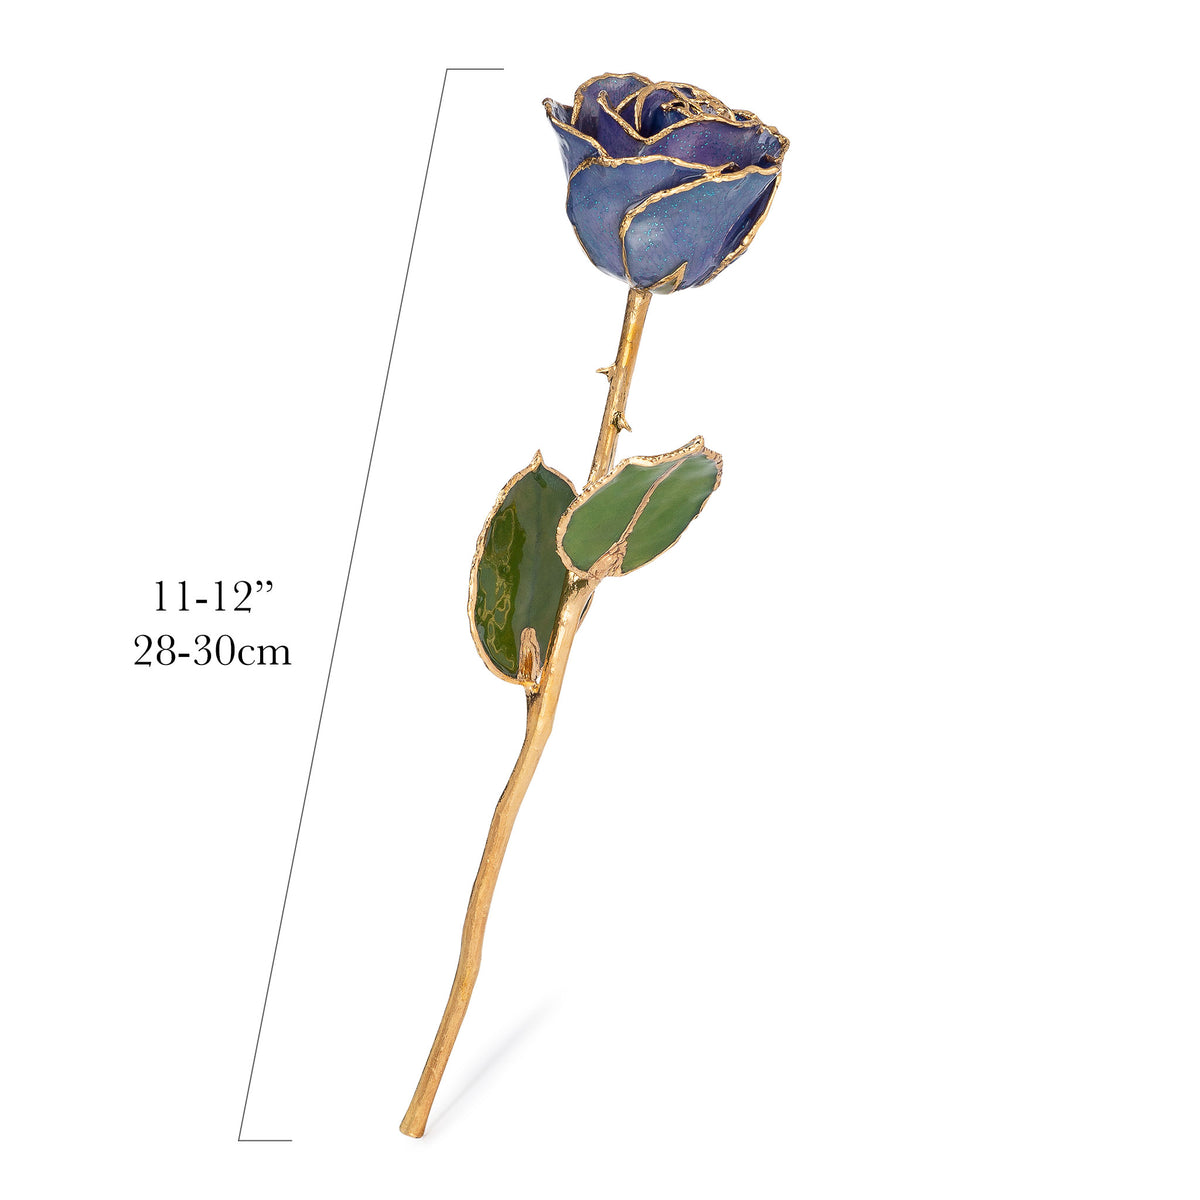 24K Gold Trimmed Forever Rose with Tanzanite (Purple, Lavender, and Blue color blend) Petals with Sapphire Blue Suspended Sparkles. View of Stem, Leaves, and Rose Petals and Showing Detail of Gold Trim with measurements